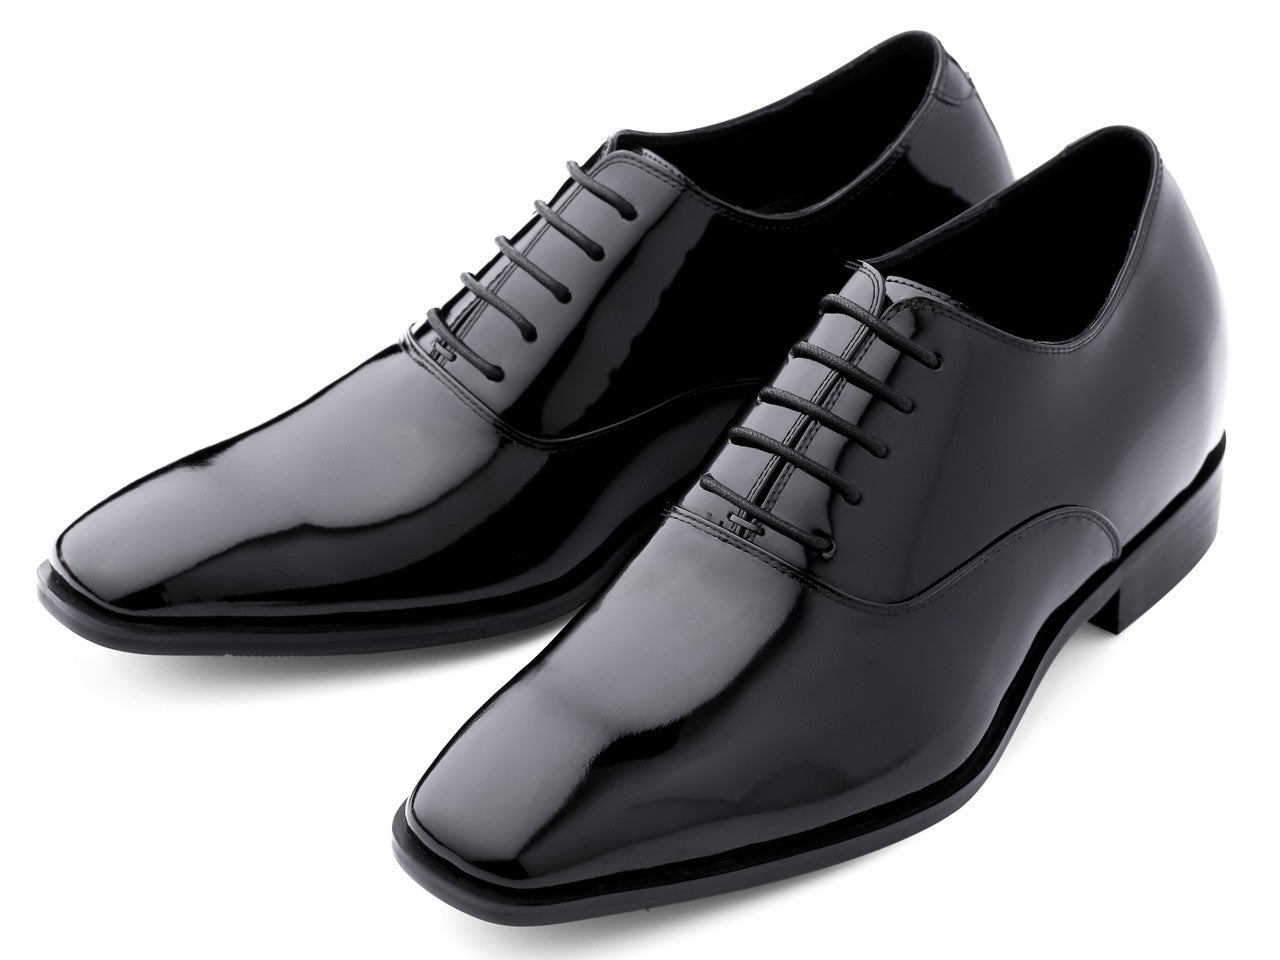 Elevator shoes height increase TOTO Oxford Patent Leather Formal Dress Shoes - Three Inches - H6532B